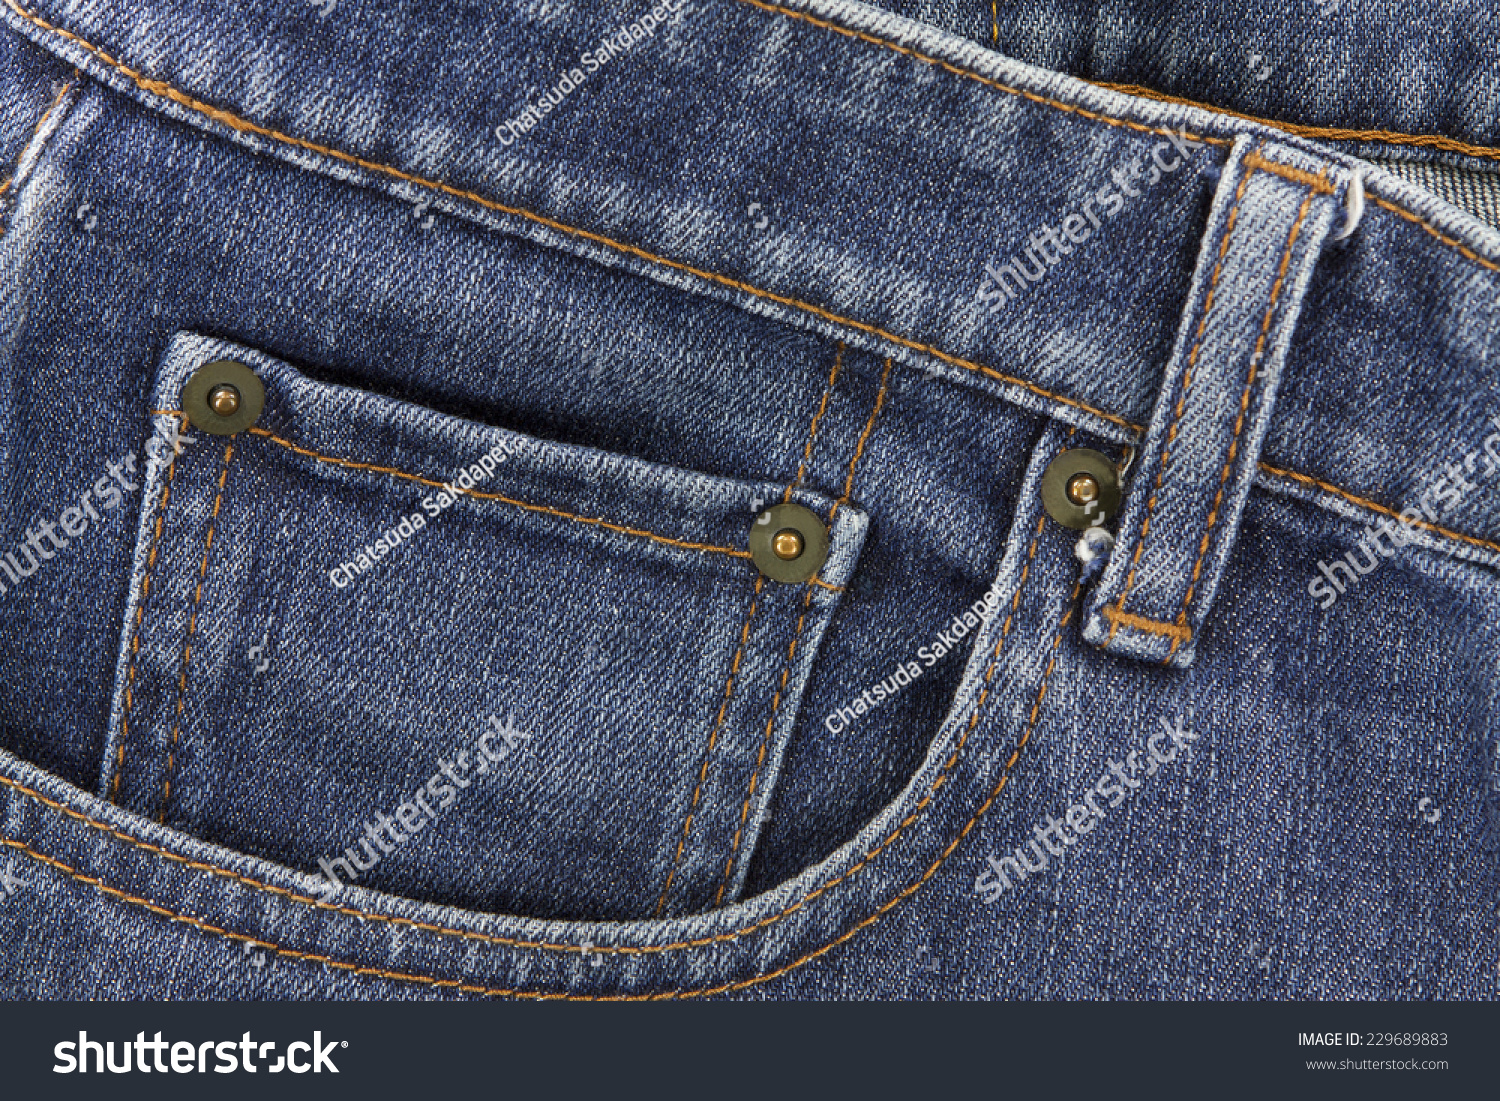 Denim Pocket Closeup Show Texture Background Of Jeans And Pockets Stock ...